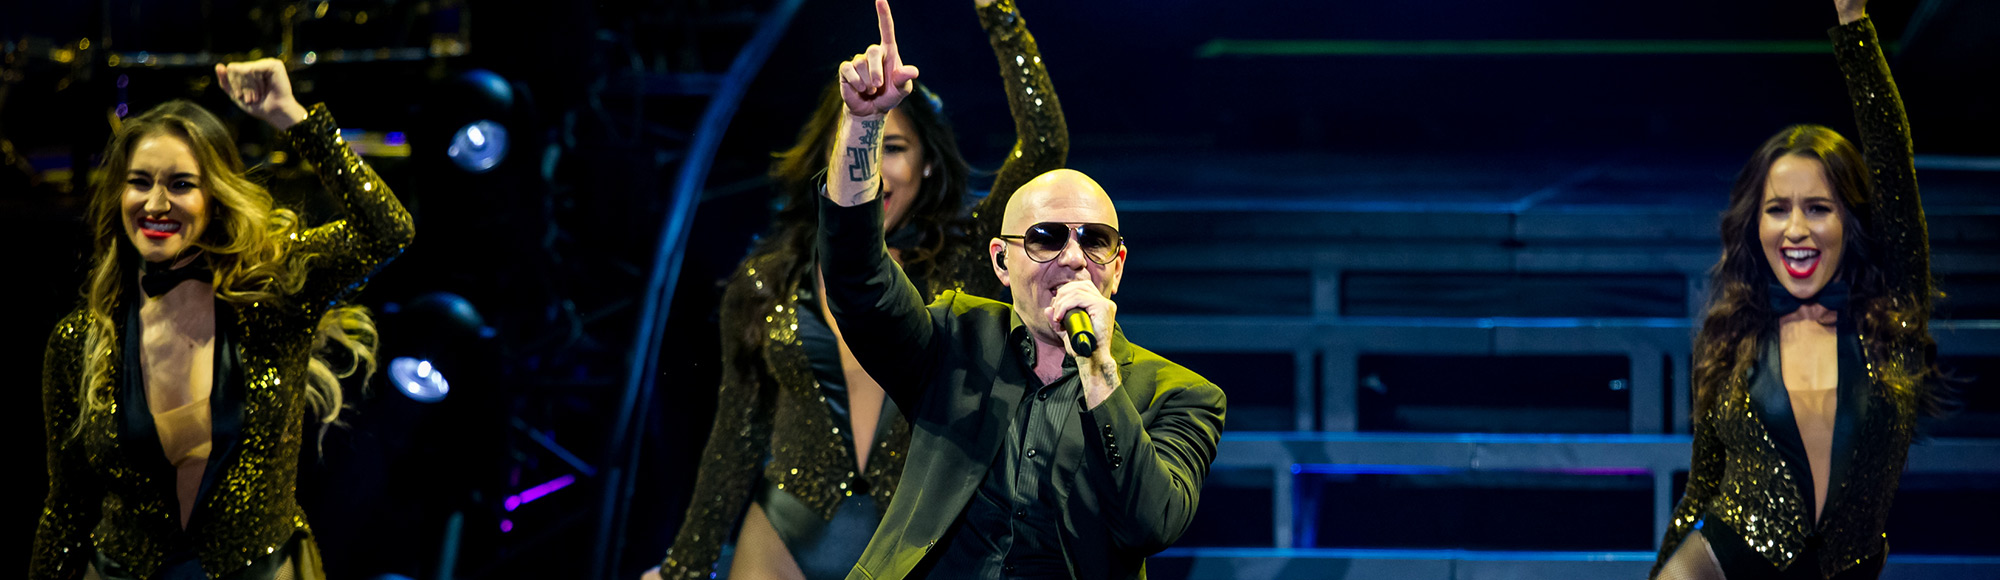 Pitbull Time Of Our Lives Show Las Vegas Tickets & Reviews